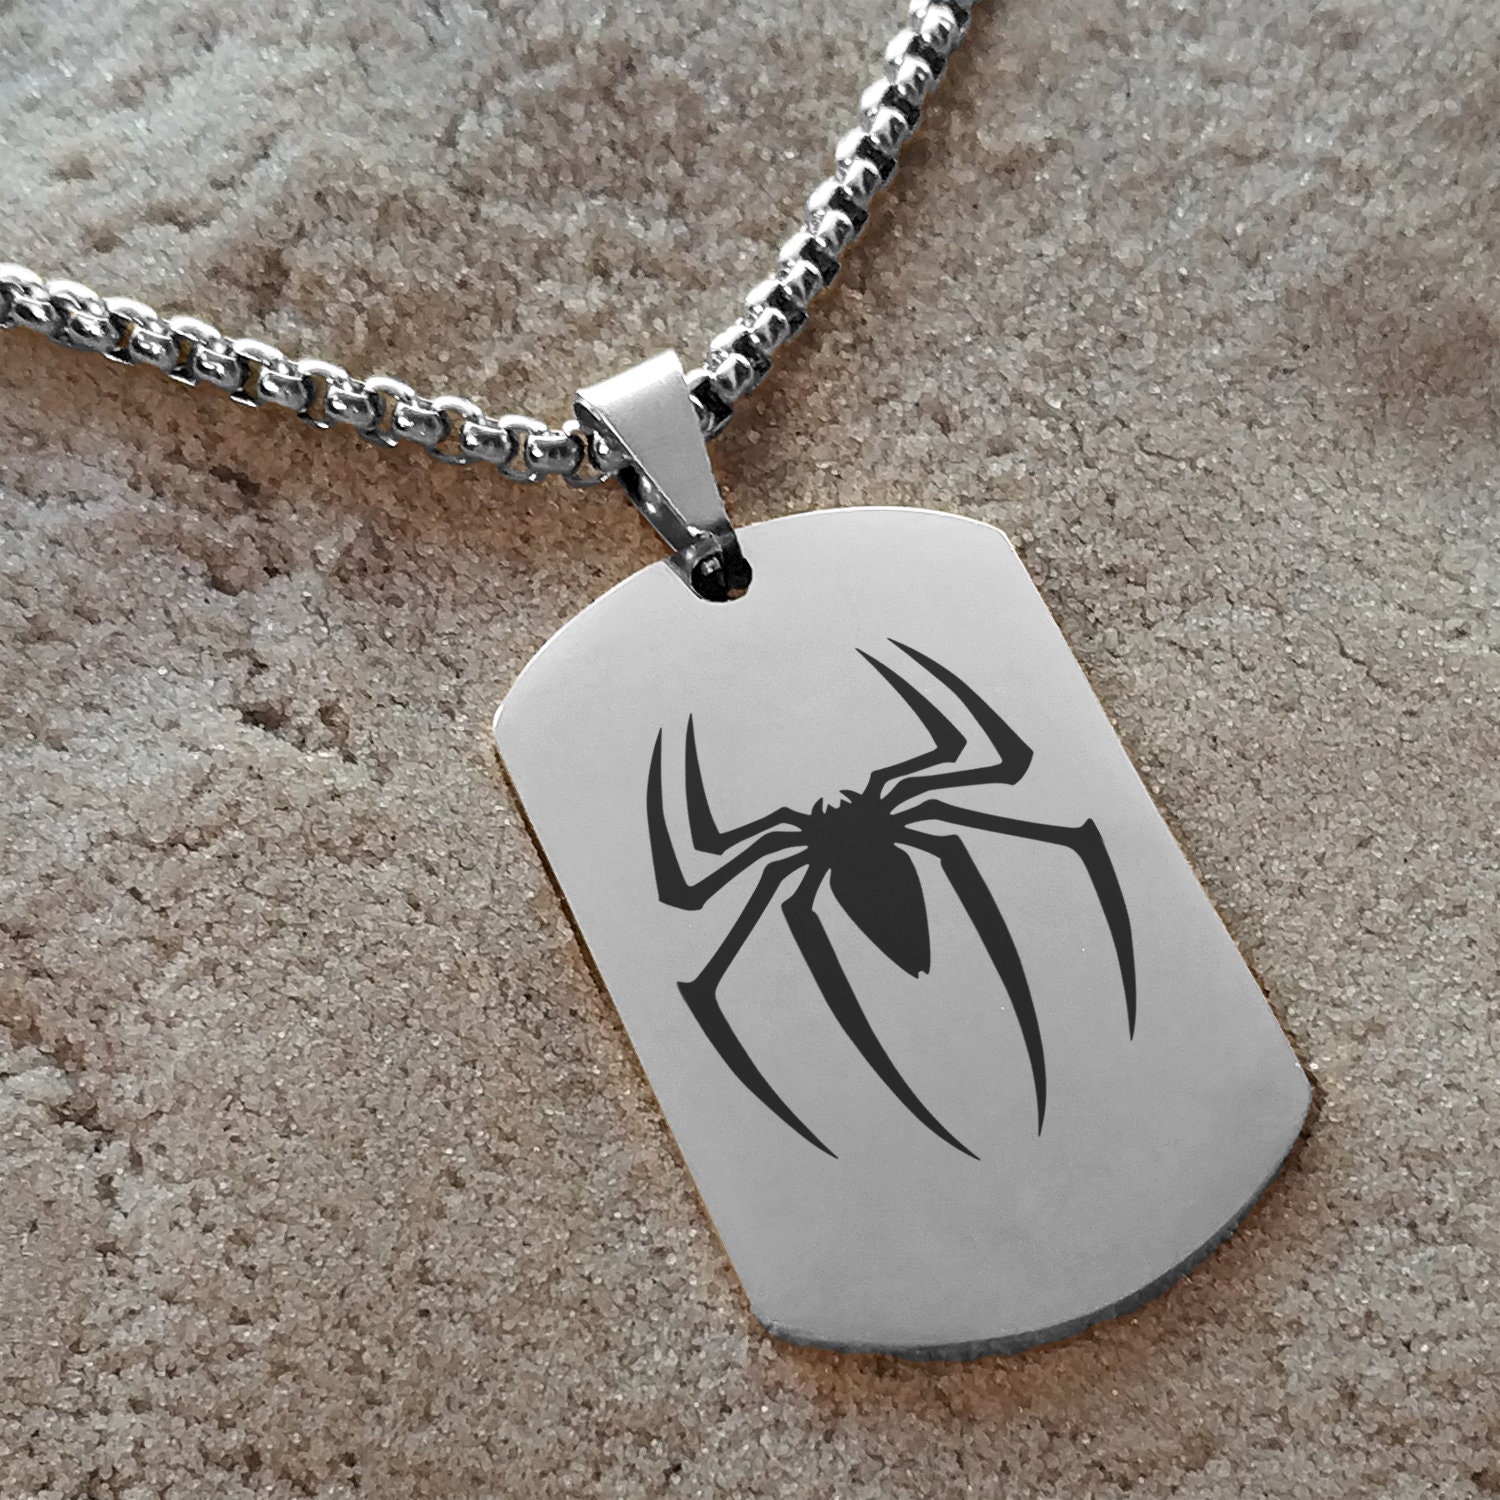 Amazon.com: WSNANG Spider Necklace Spider Movie Inspired Hero Gifts Pendant  Necklace Halloween Spider Jewelry for Him/Her (Y nc): Clothing, Shoes &  Jewelry